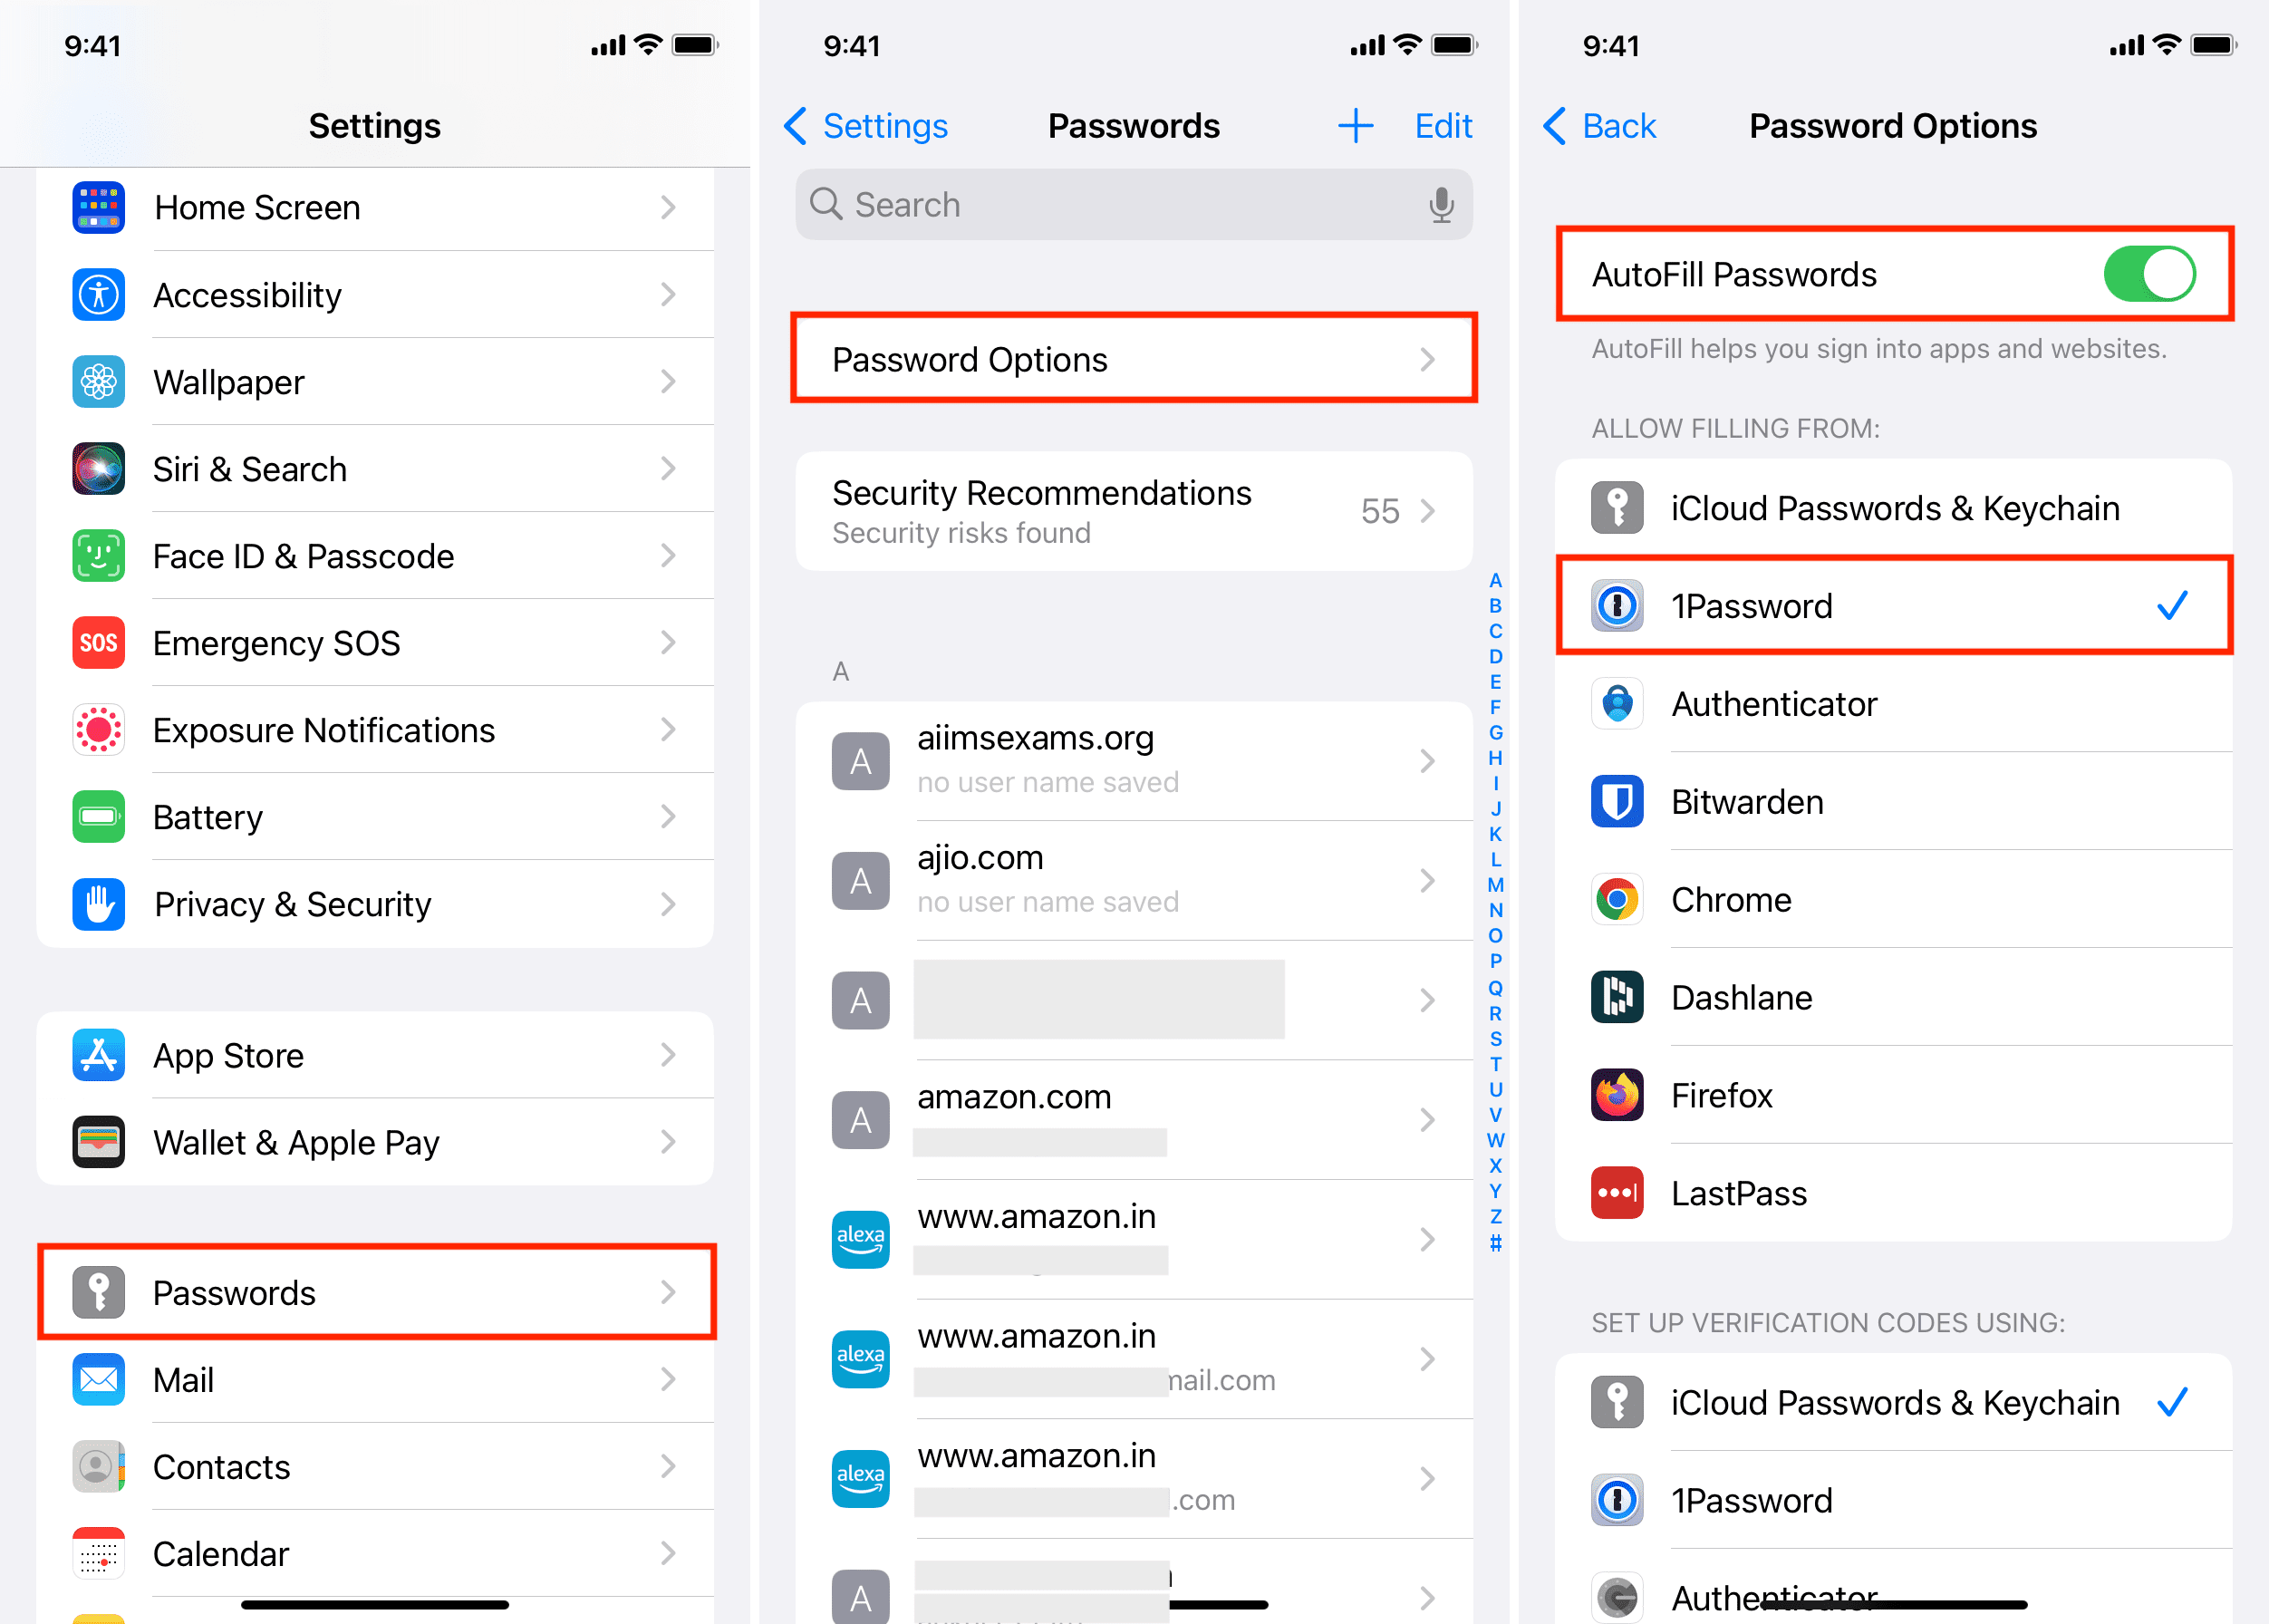 AutoFill Passwords from third-party apps on iPhone